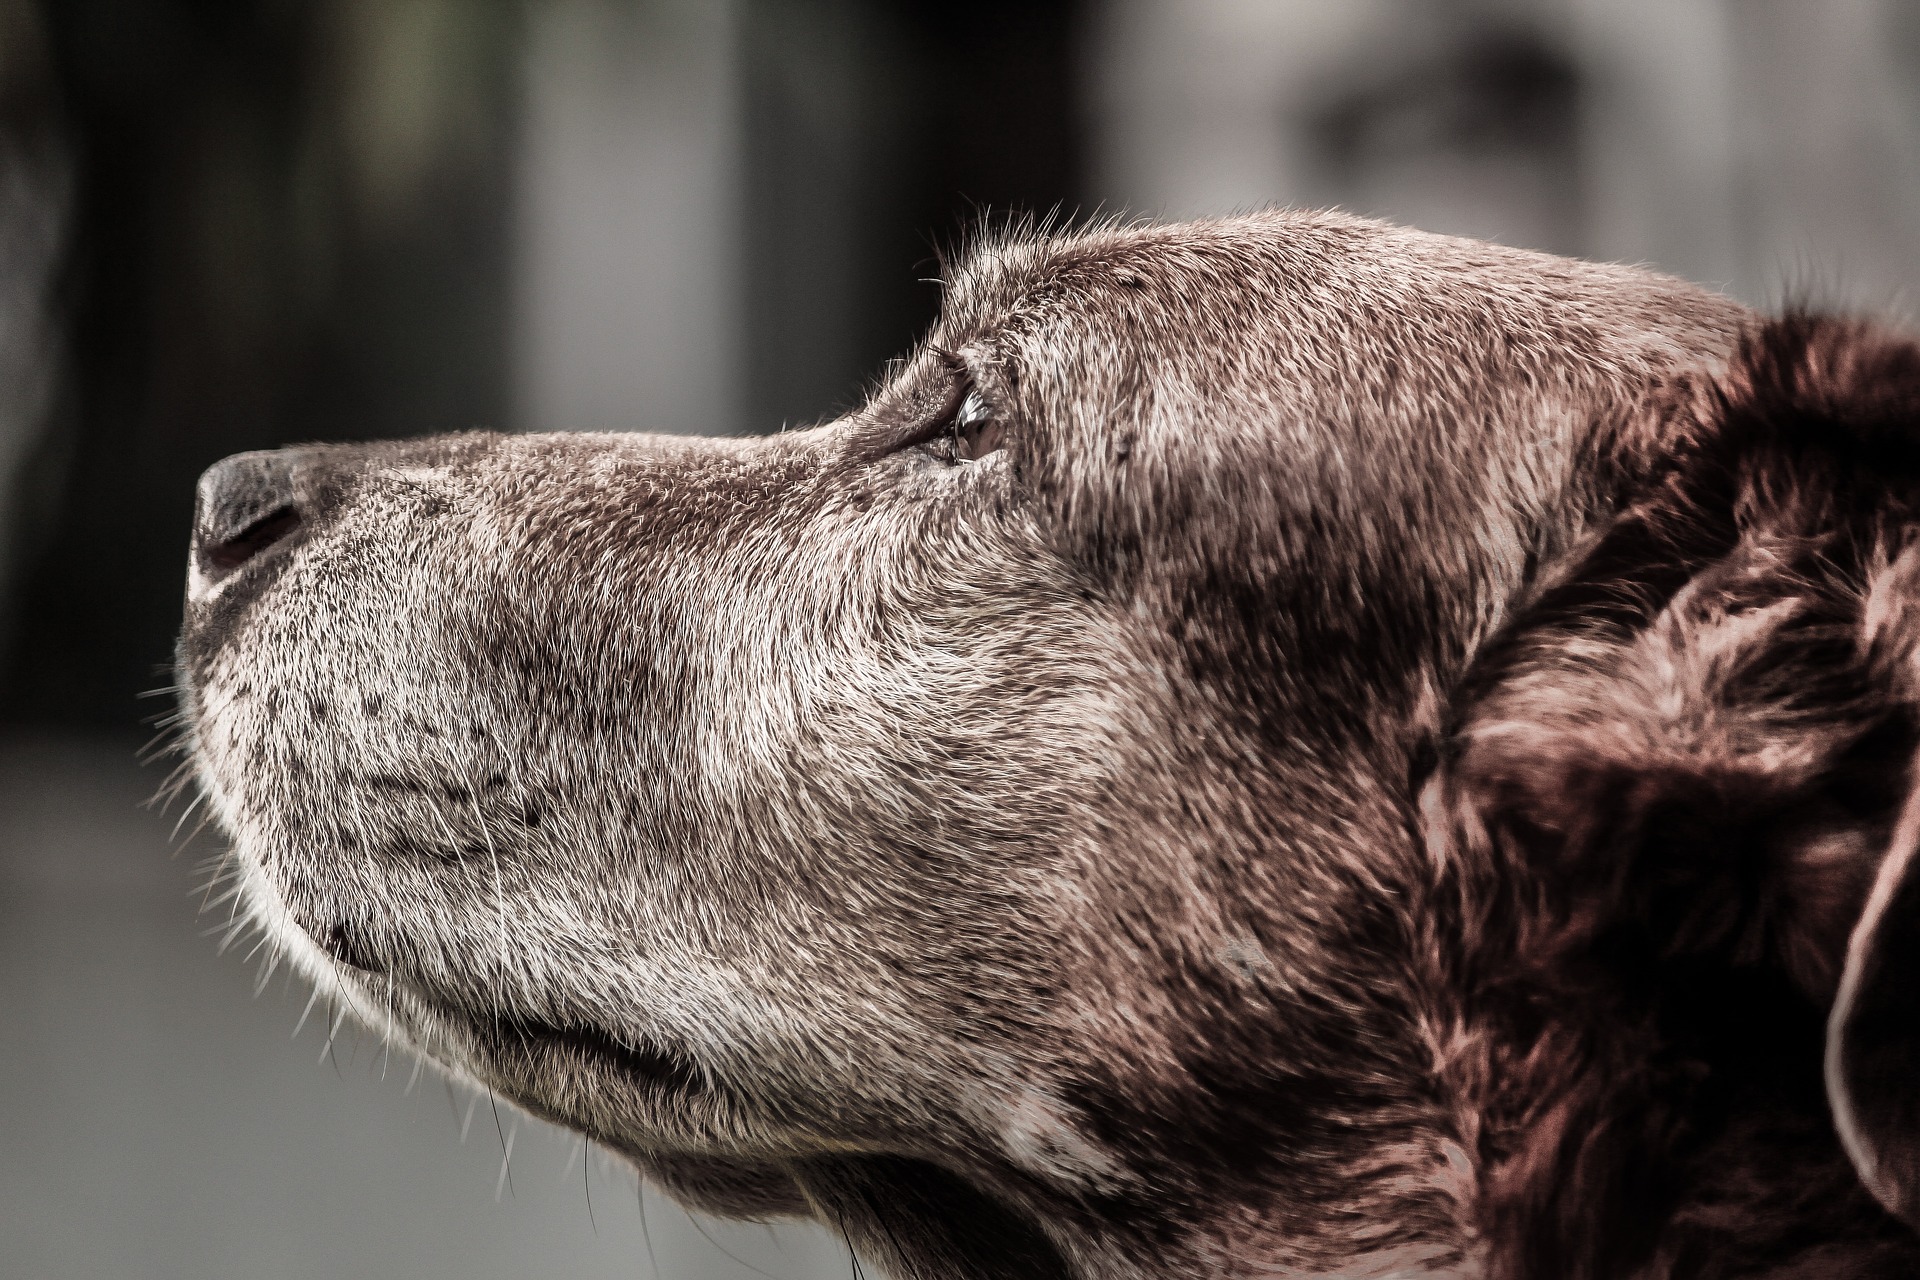 Symptoms of Cognitive Dysfunction Syndrome in Dogs